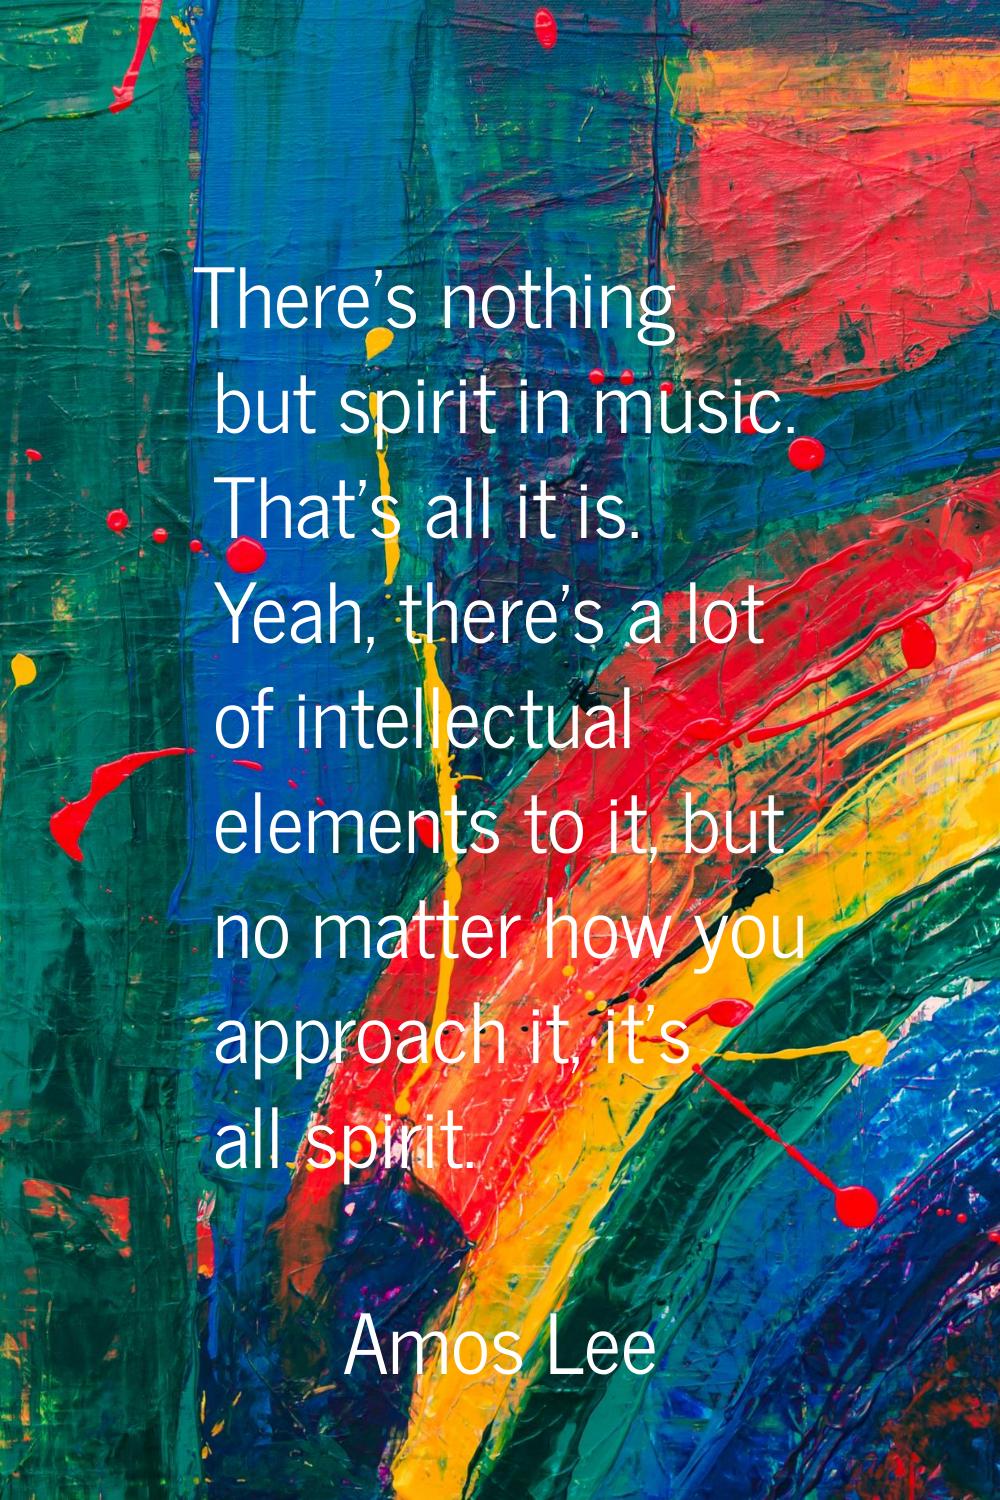 There's nothing but spirit in music. That's all it is. Yeah, there's a lot of intellectual elements